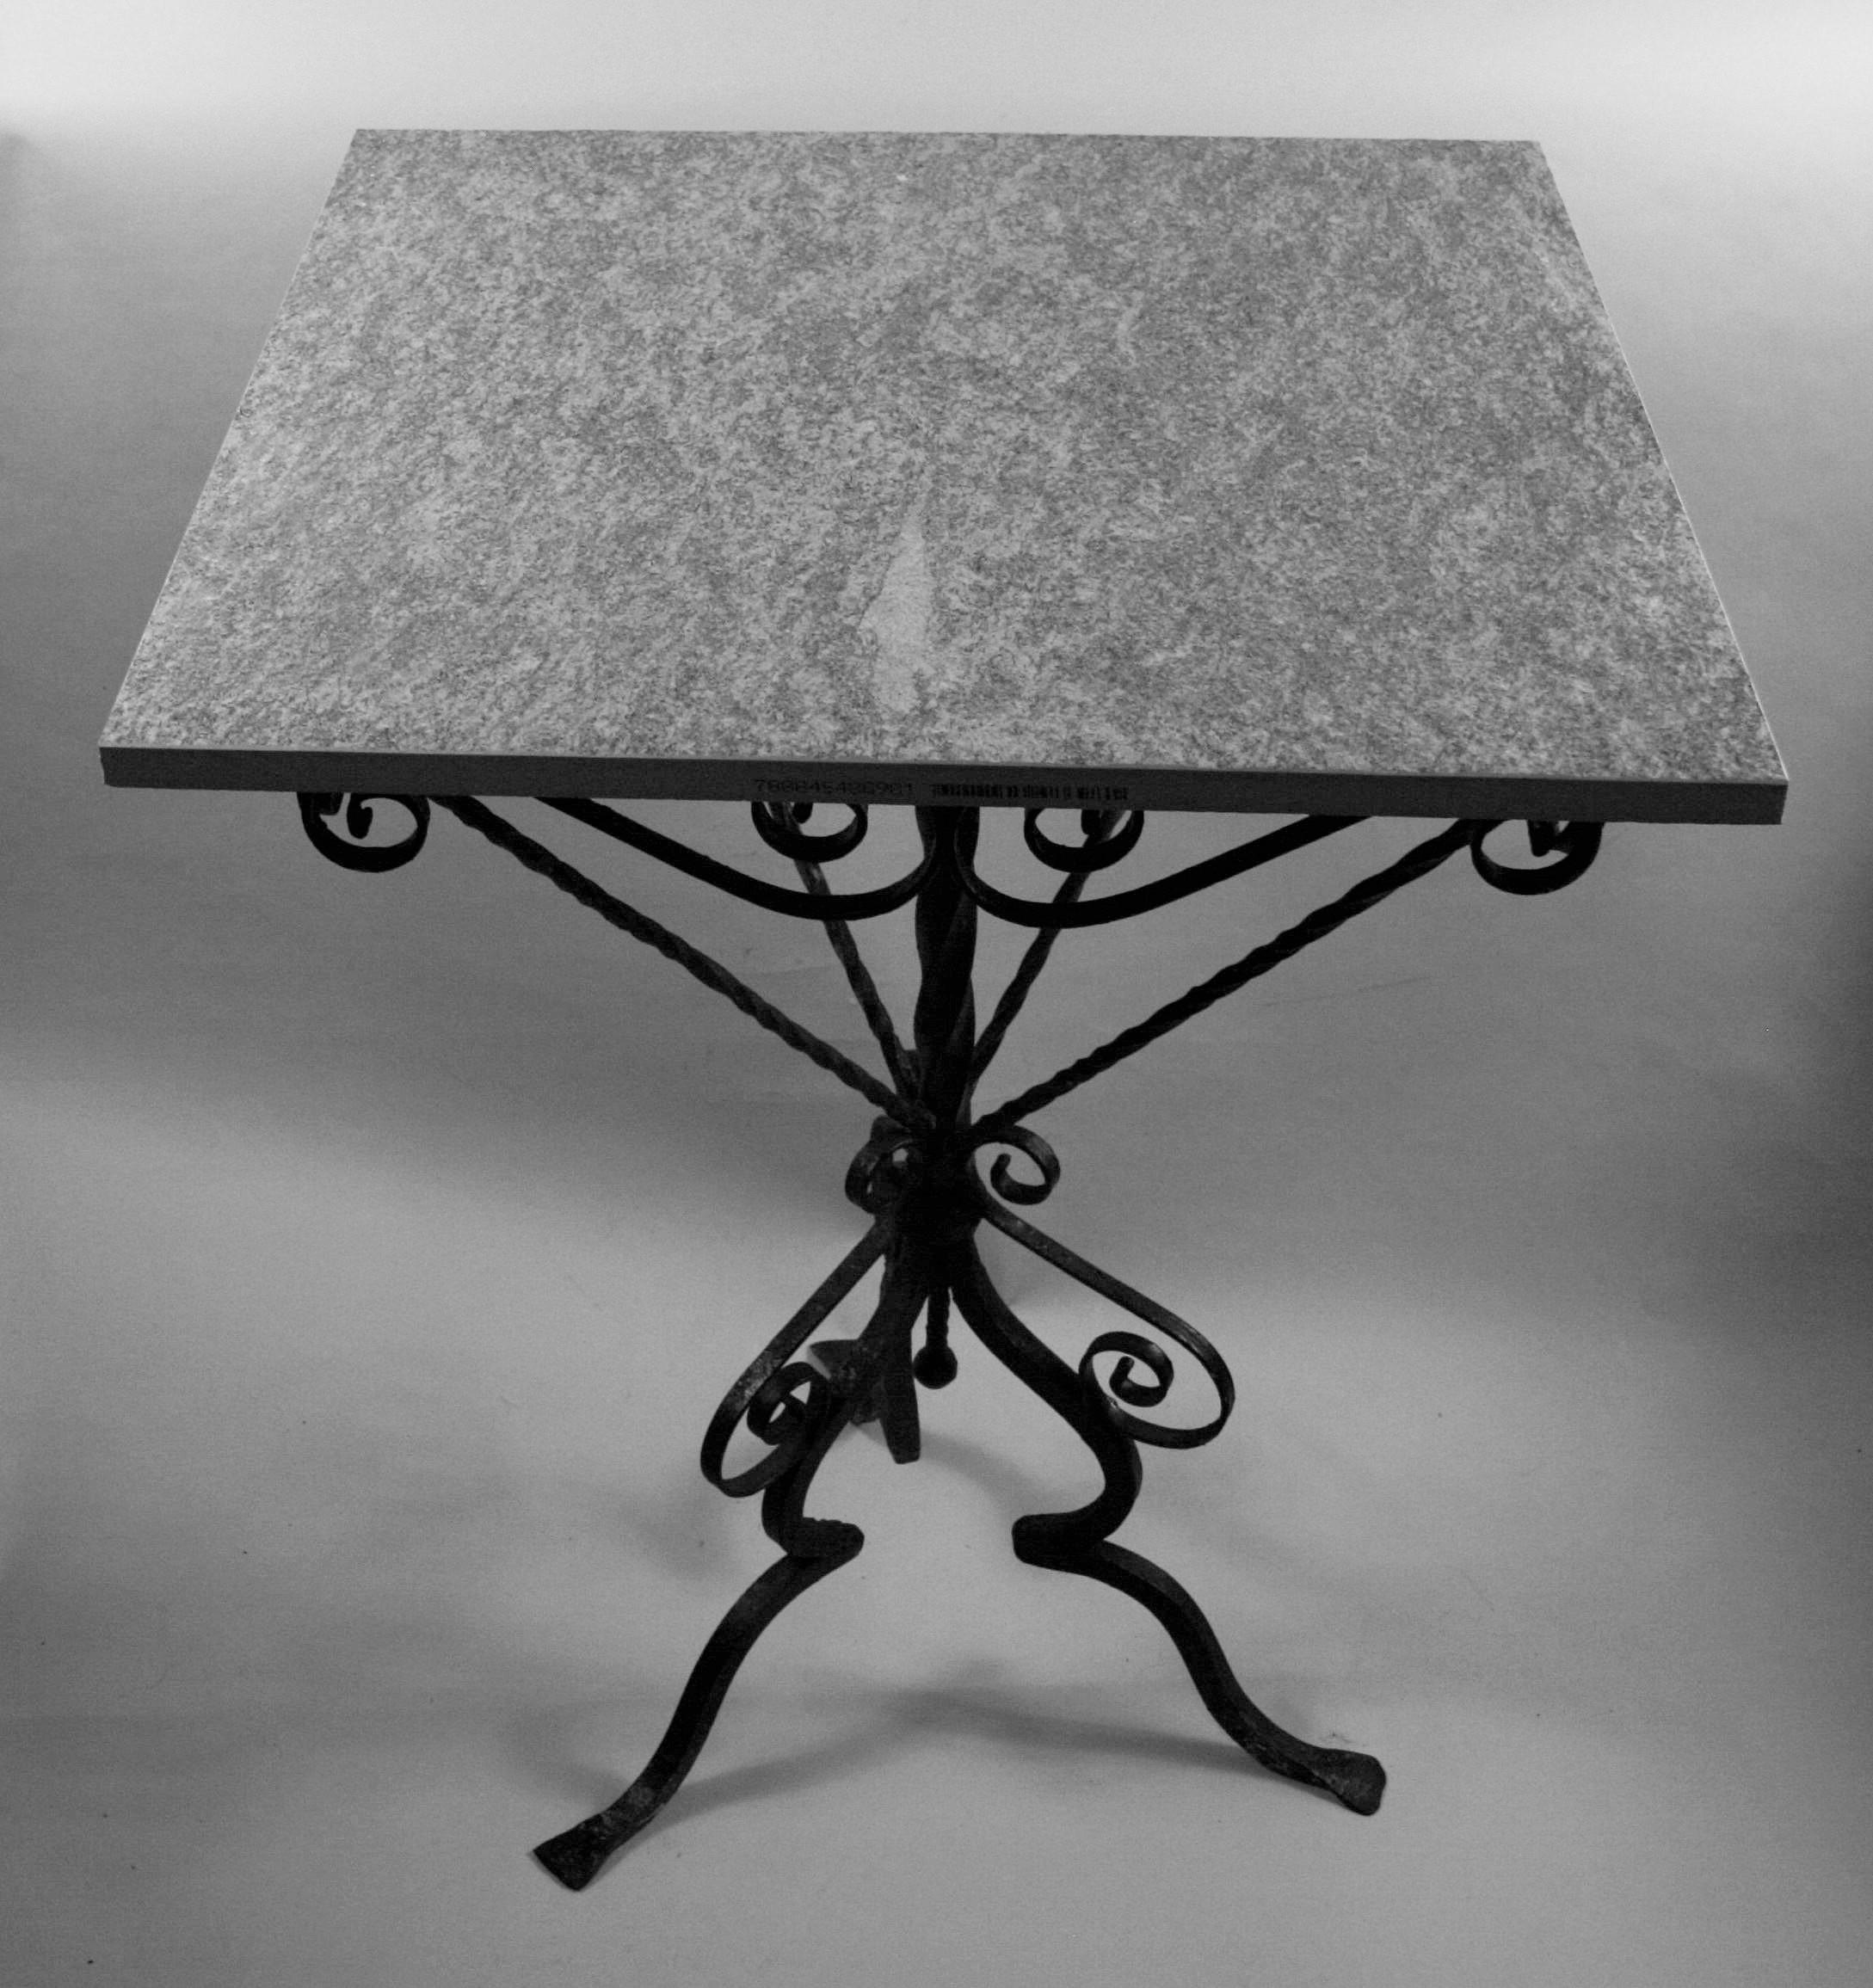 3-625 Italian hand made scrolled iron base with new ceramic top.